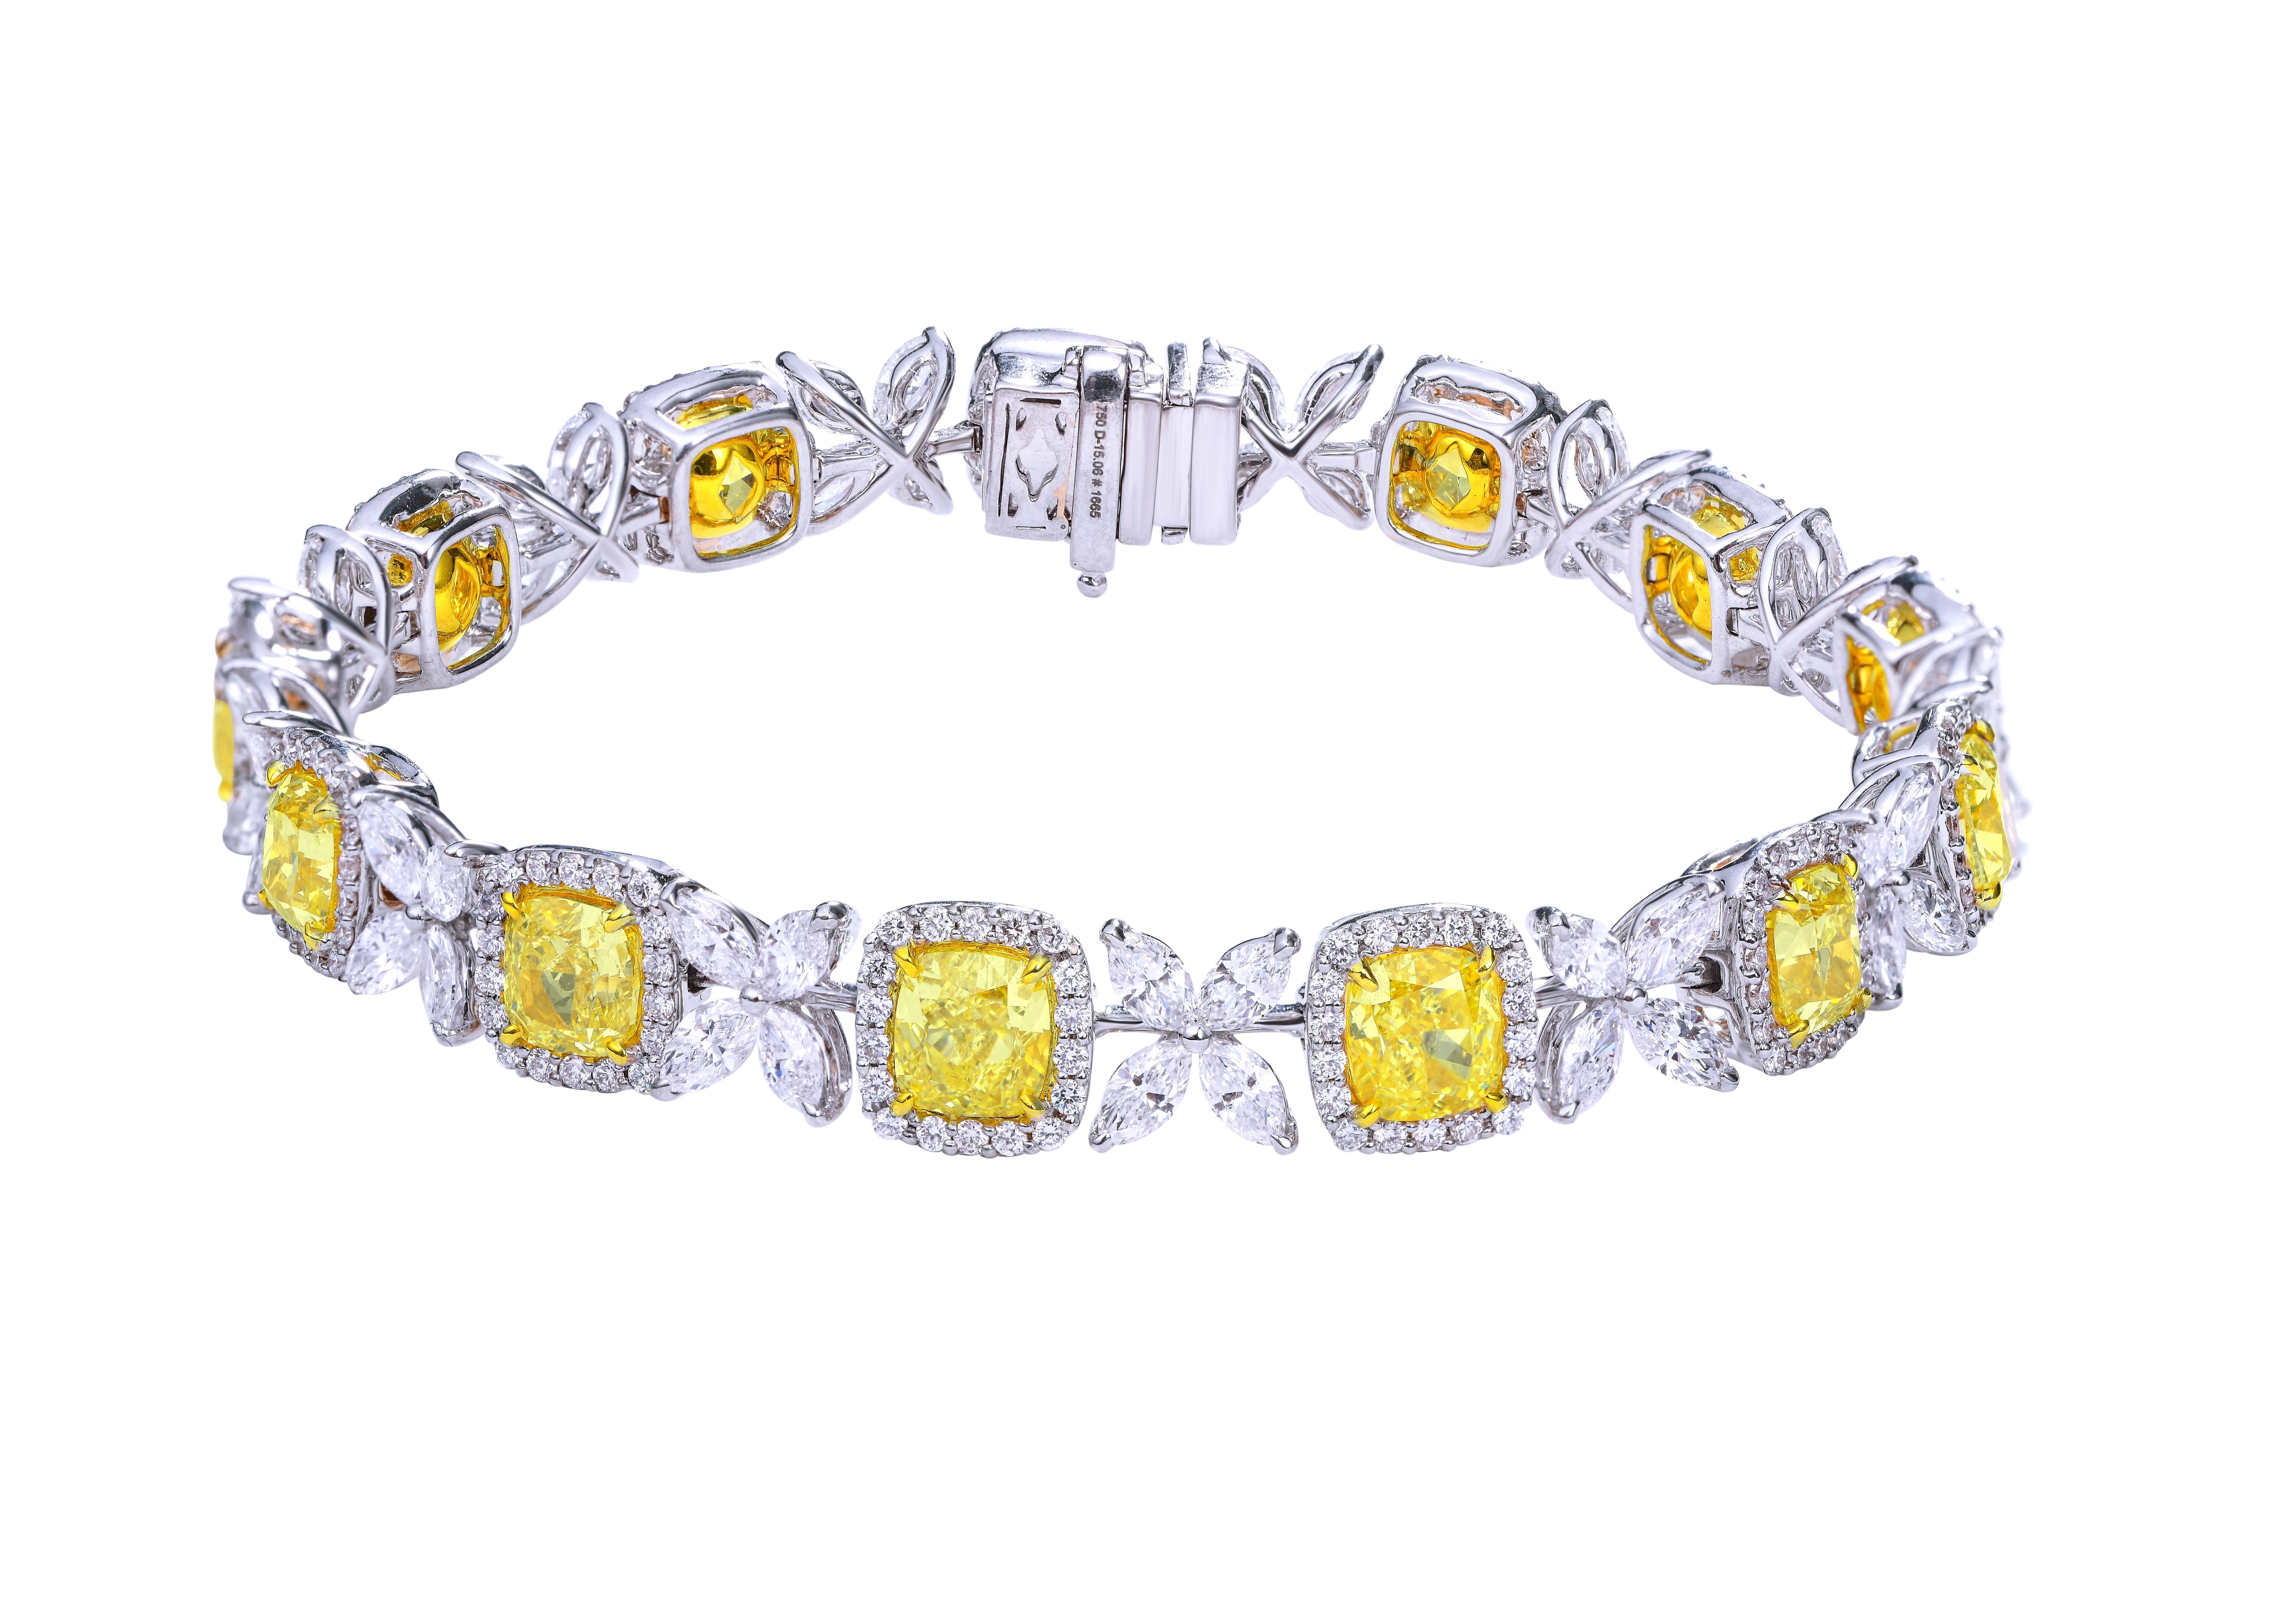 Radiant Cut Fancy Yellow Cushion and White Halo Bracelet, 15.06 Carat For Sale